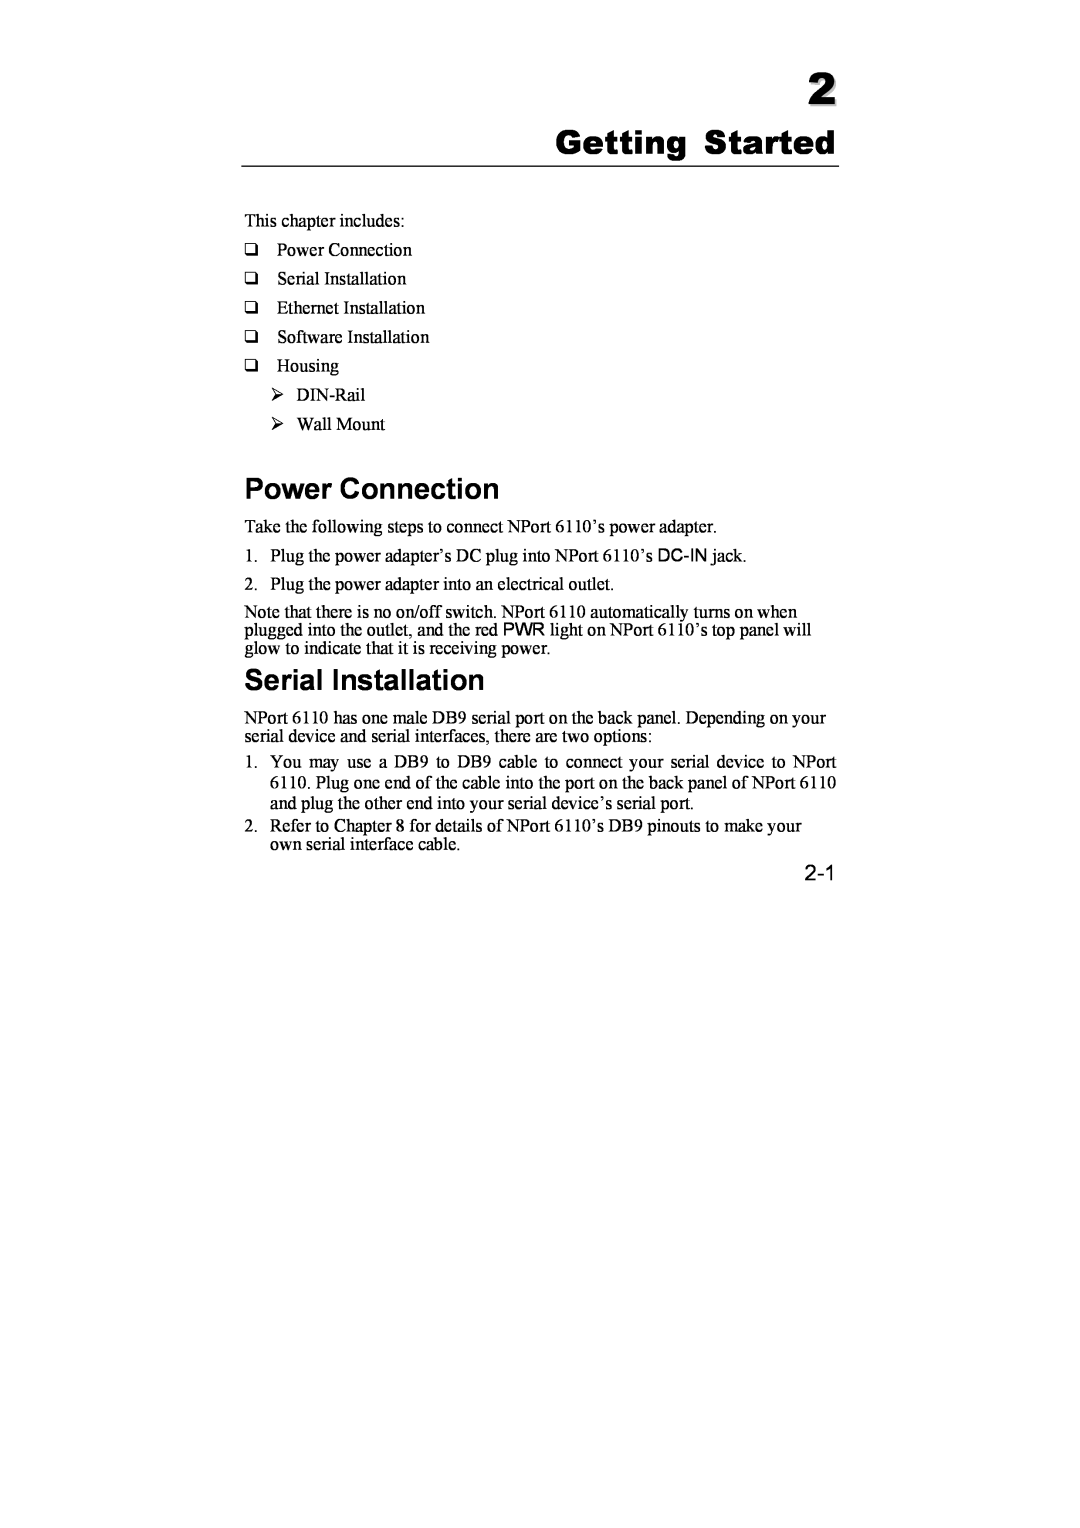 Moxa Technologies 6110 user manual Getting Started, Power Connection, Serial Installation 